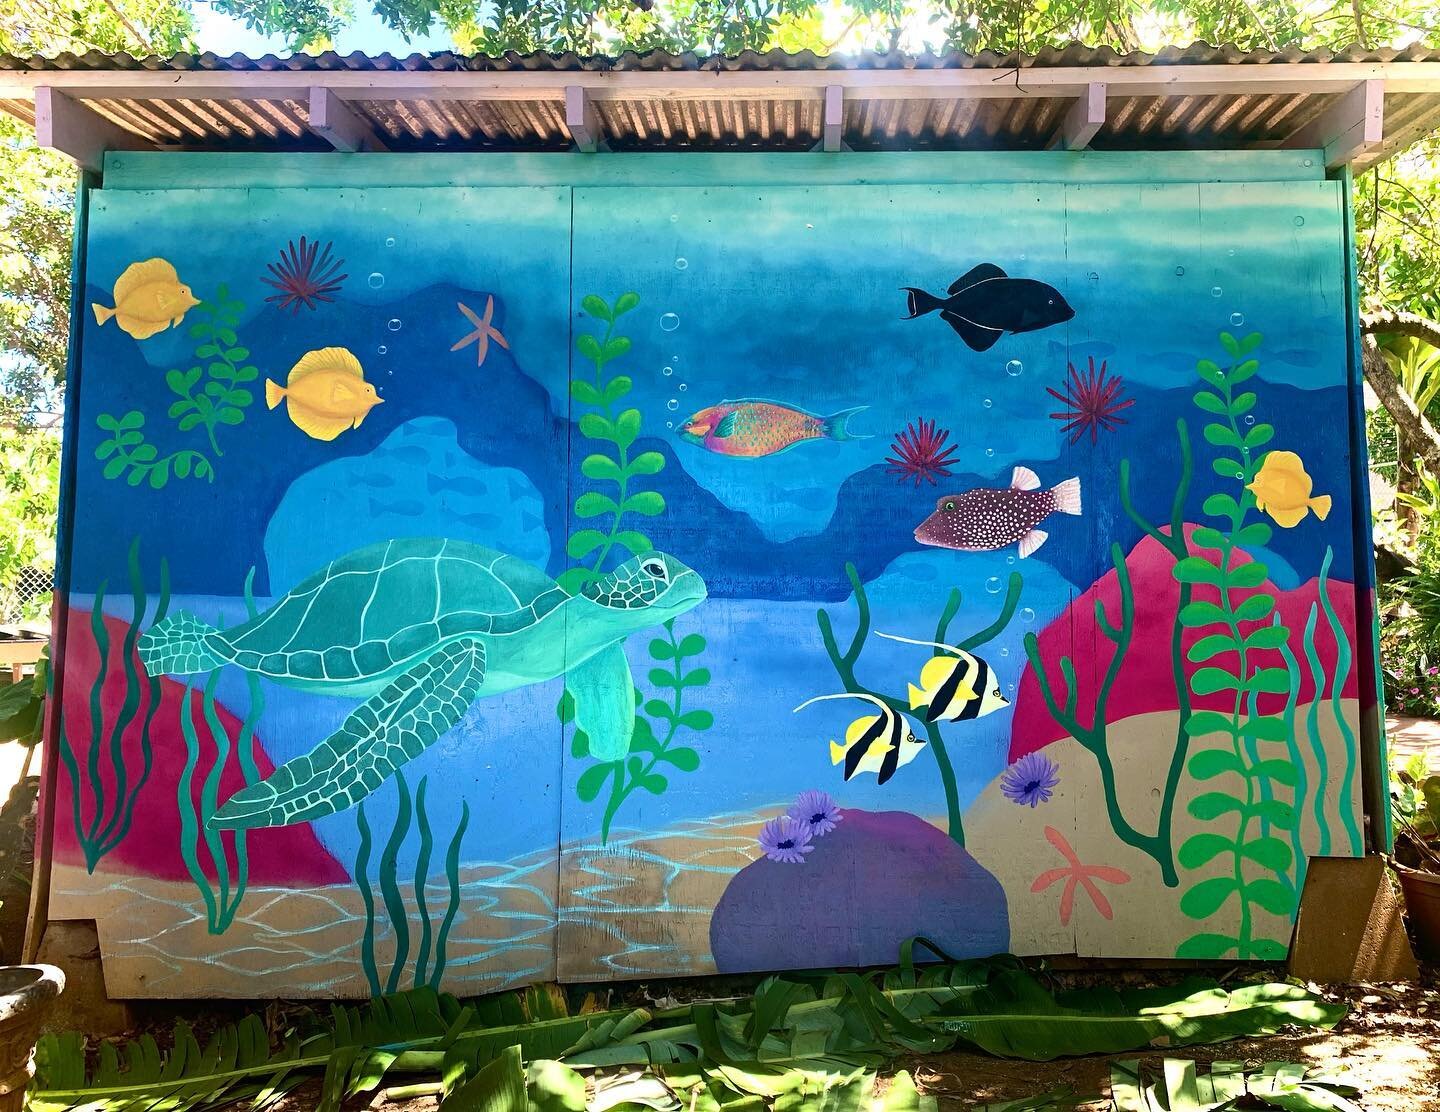 It&rsquo;s been a summer of murals at @surfcatranch sanctuary! 😽

Here is a finished coral reef scene featuring Hawaiian reef fish + honu 🐢💙 reflecting on how special our coral reefs are~ I&rsquo;m so grateful for all of us making efforts to prote